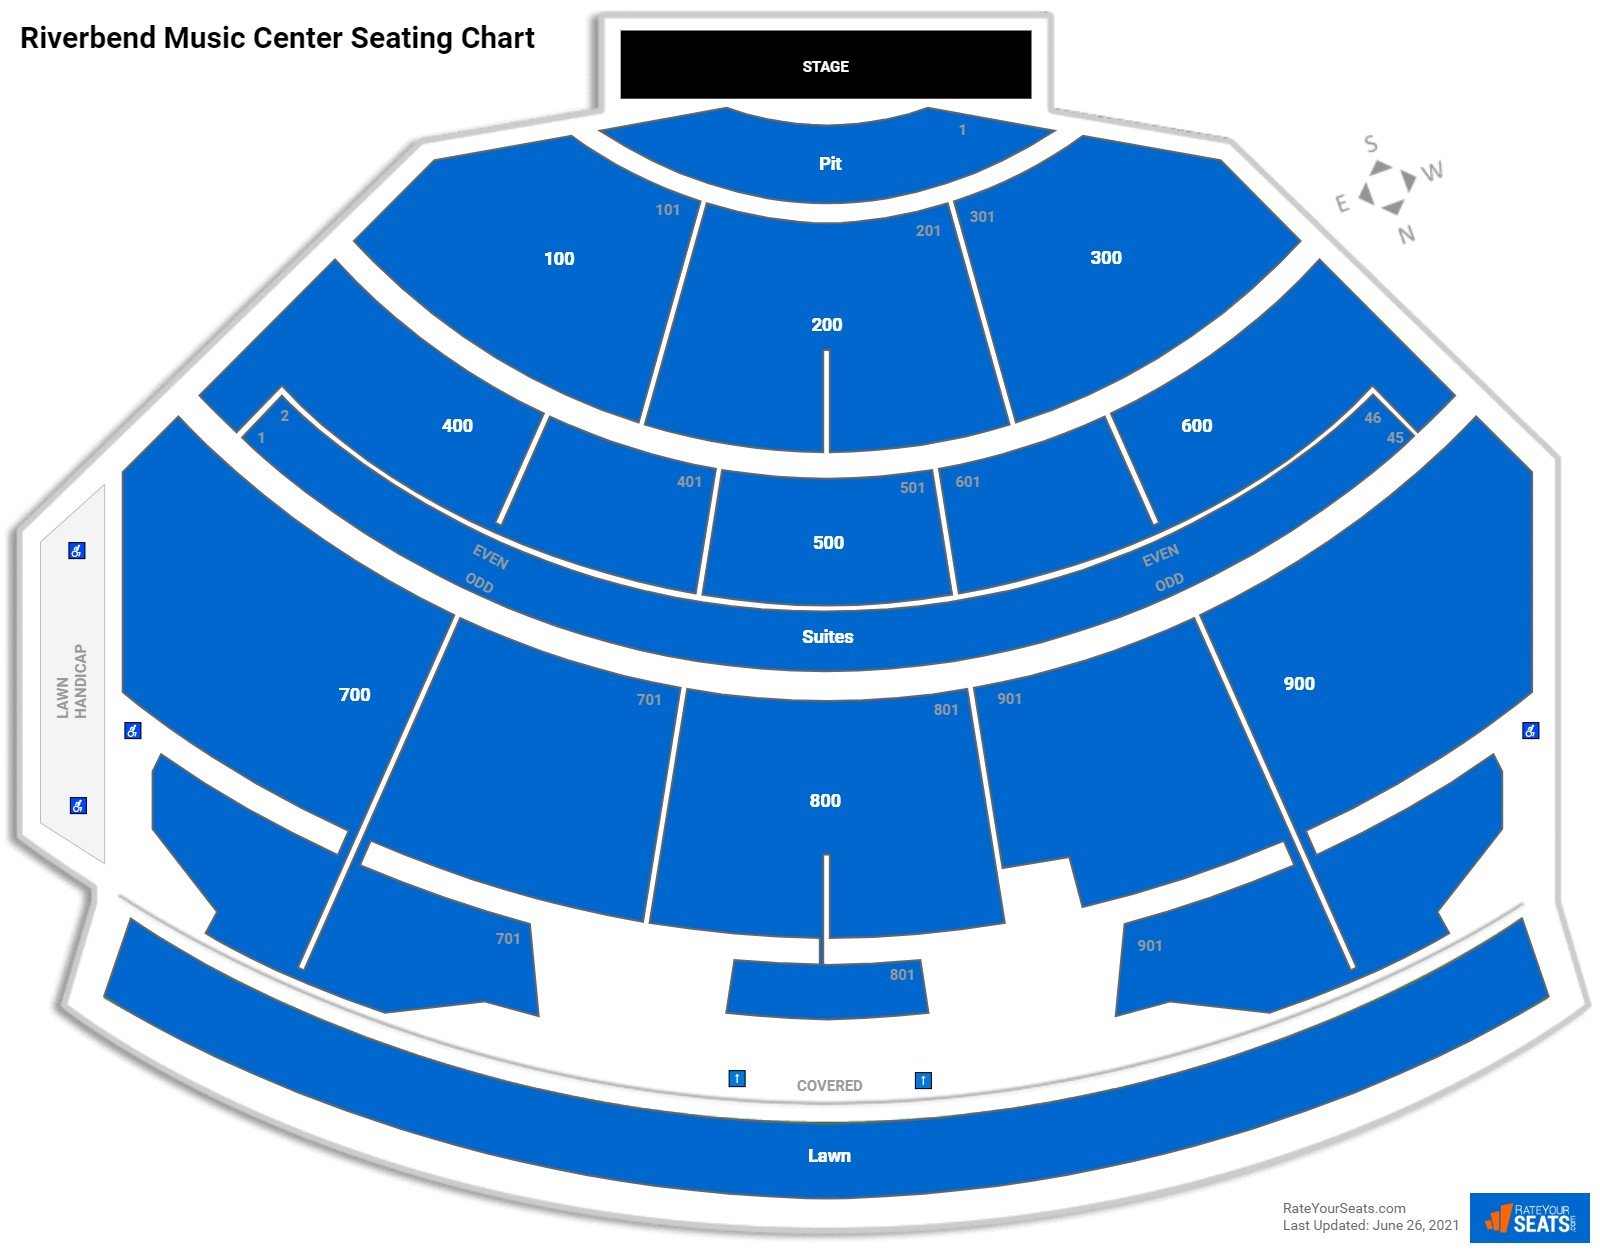 Riverbend Music Center Concert Seating Chart